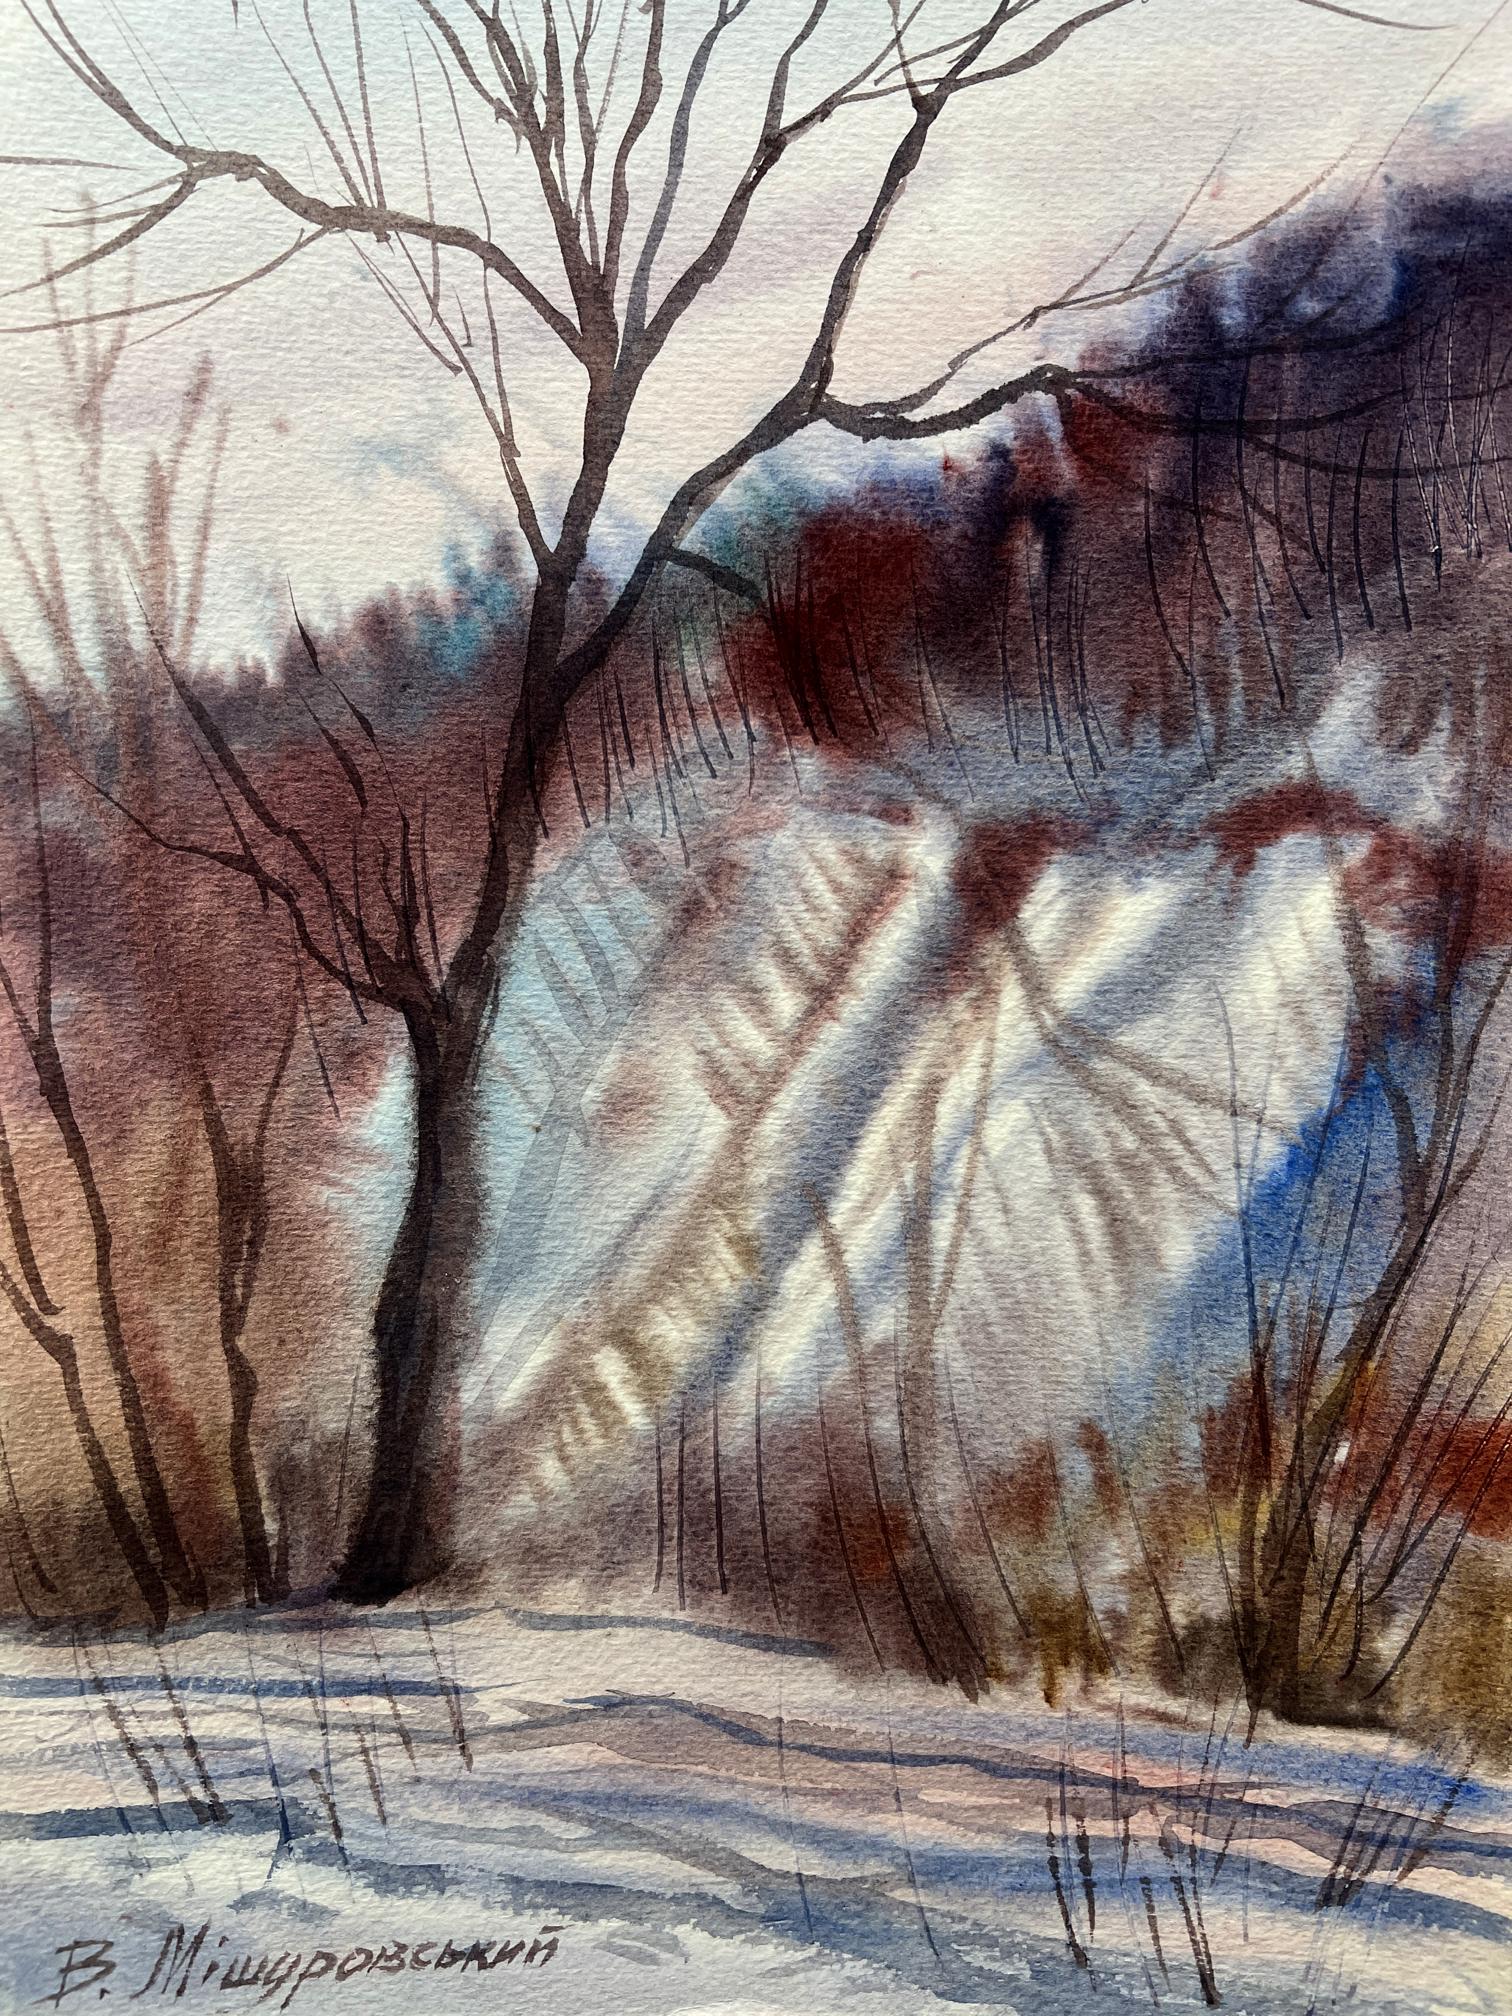 Watercolor painting February in the Carpathians V. Mishurovsky